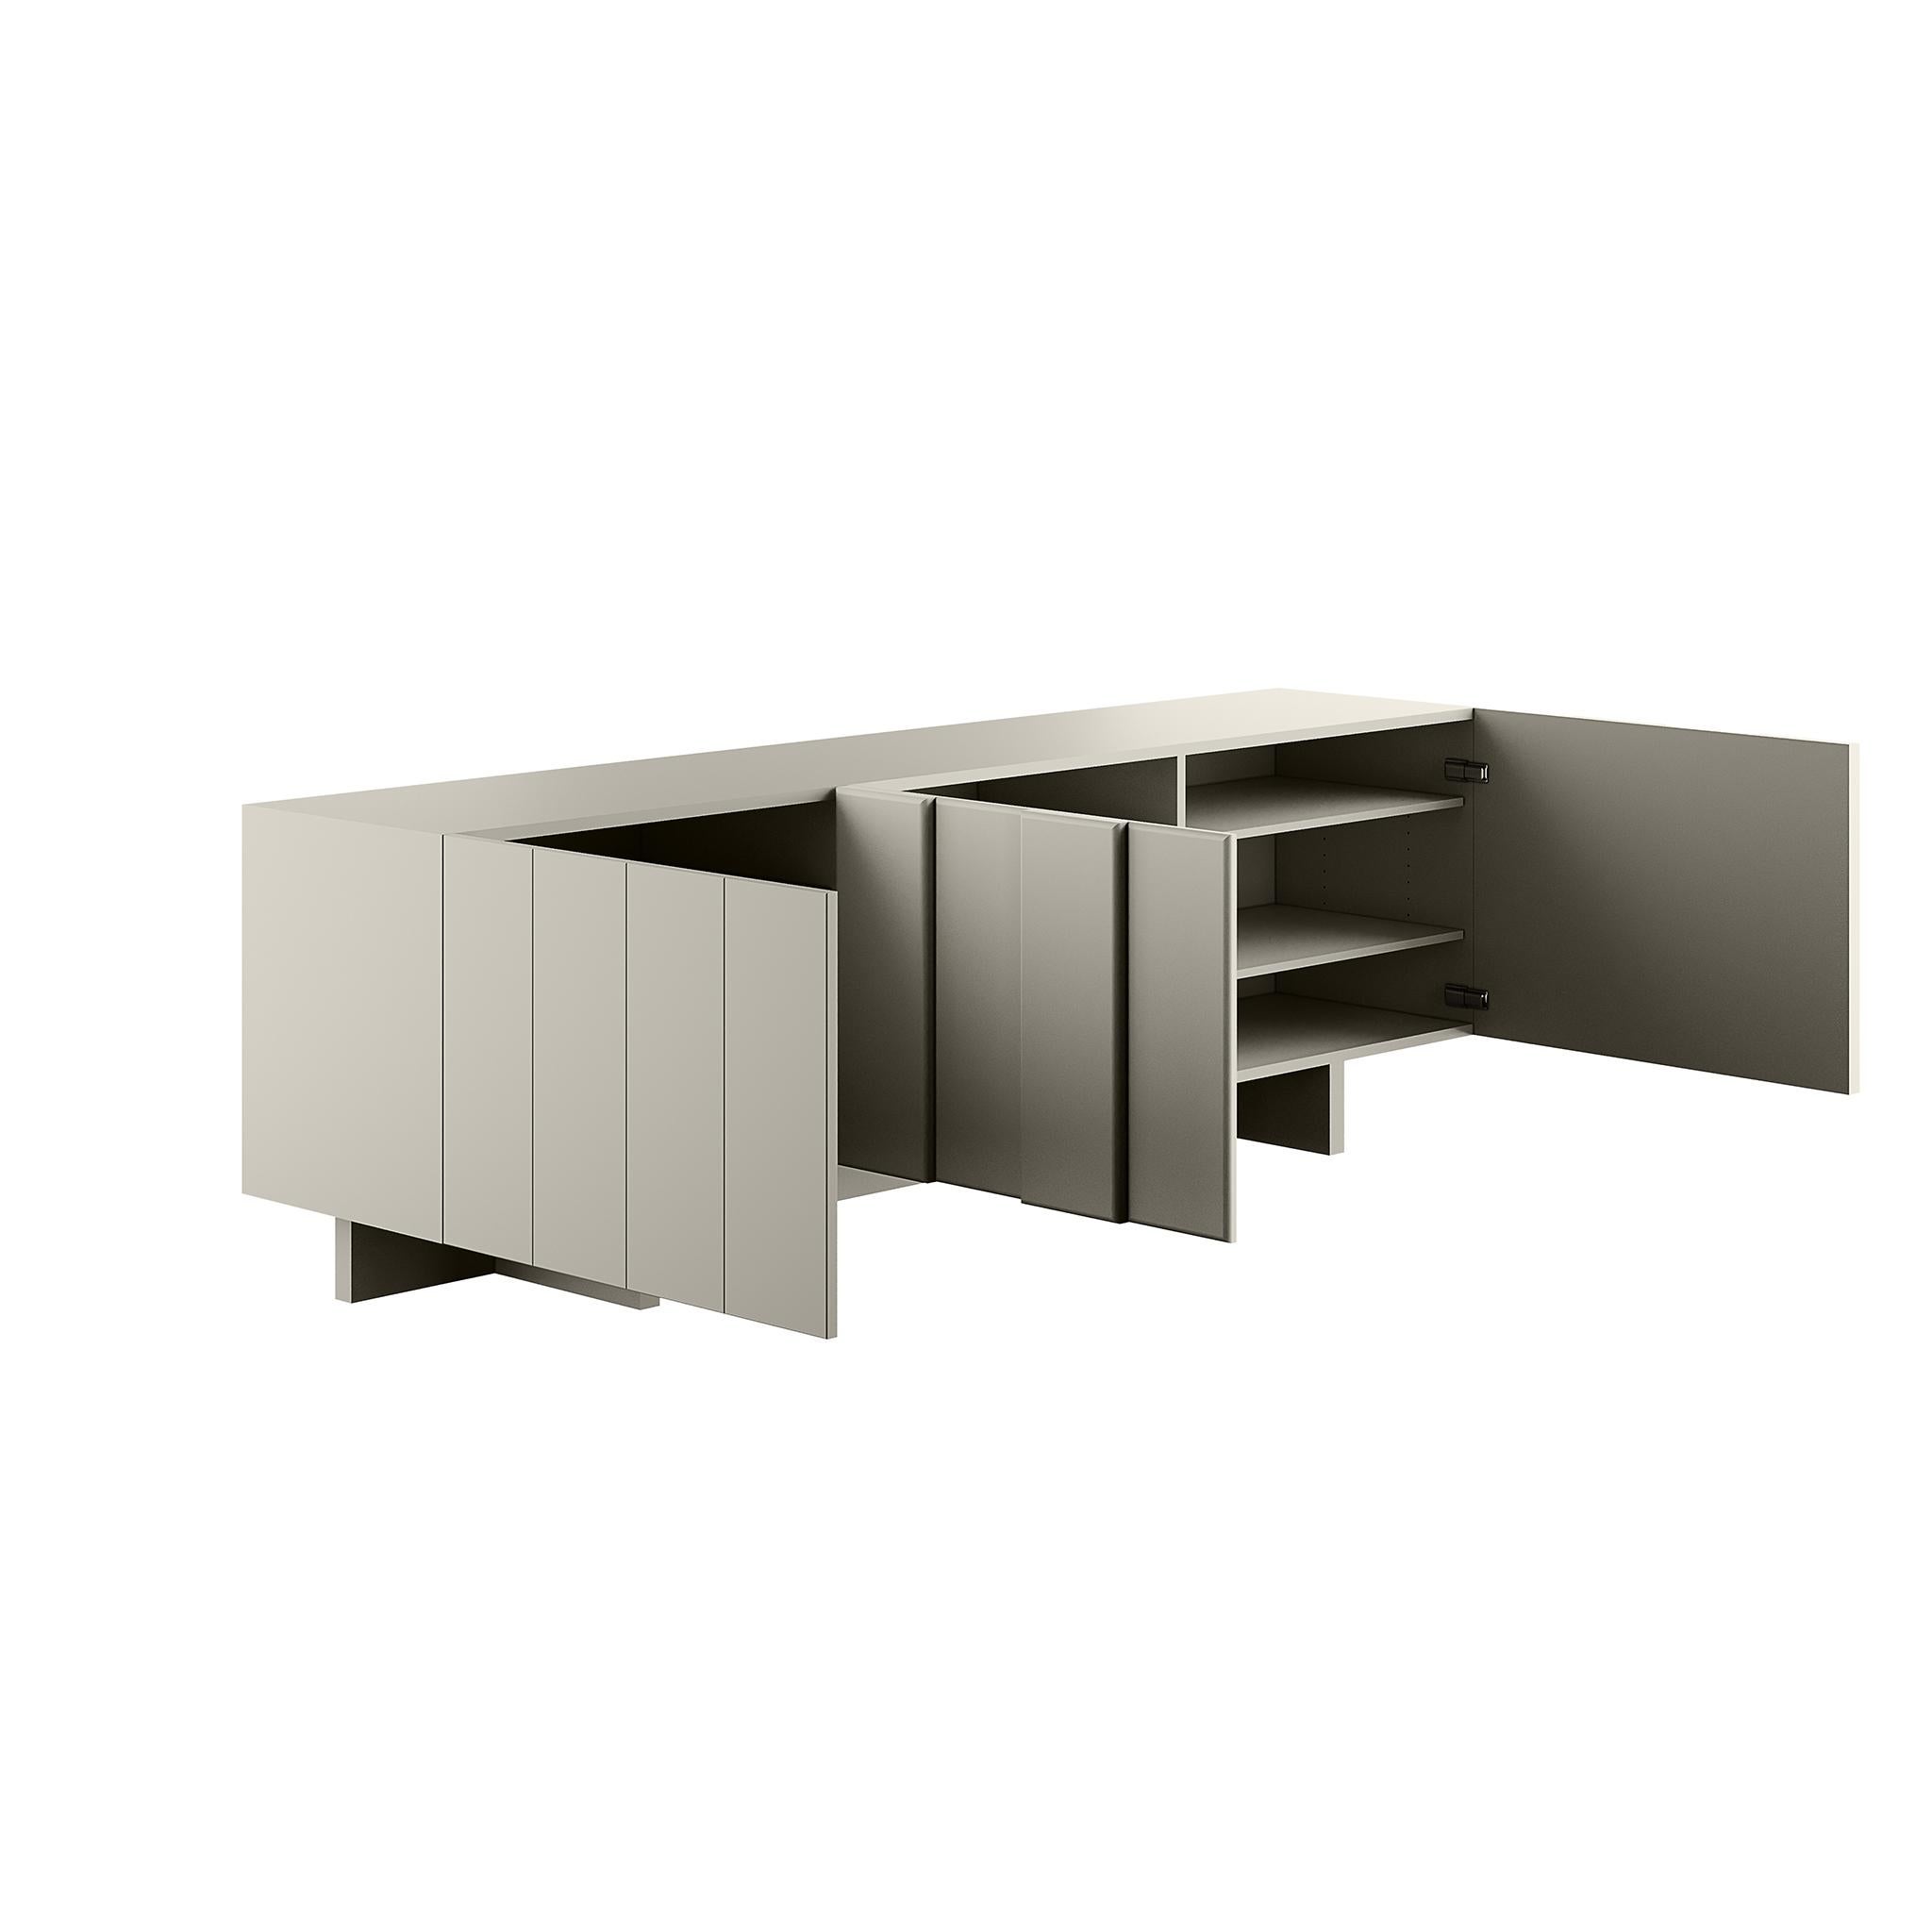 Contemporary Minimal Sideboard 3 Doors Wood Beige Mate Lacquer For Sale 2